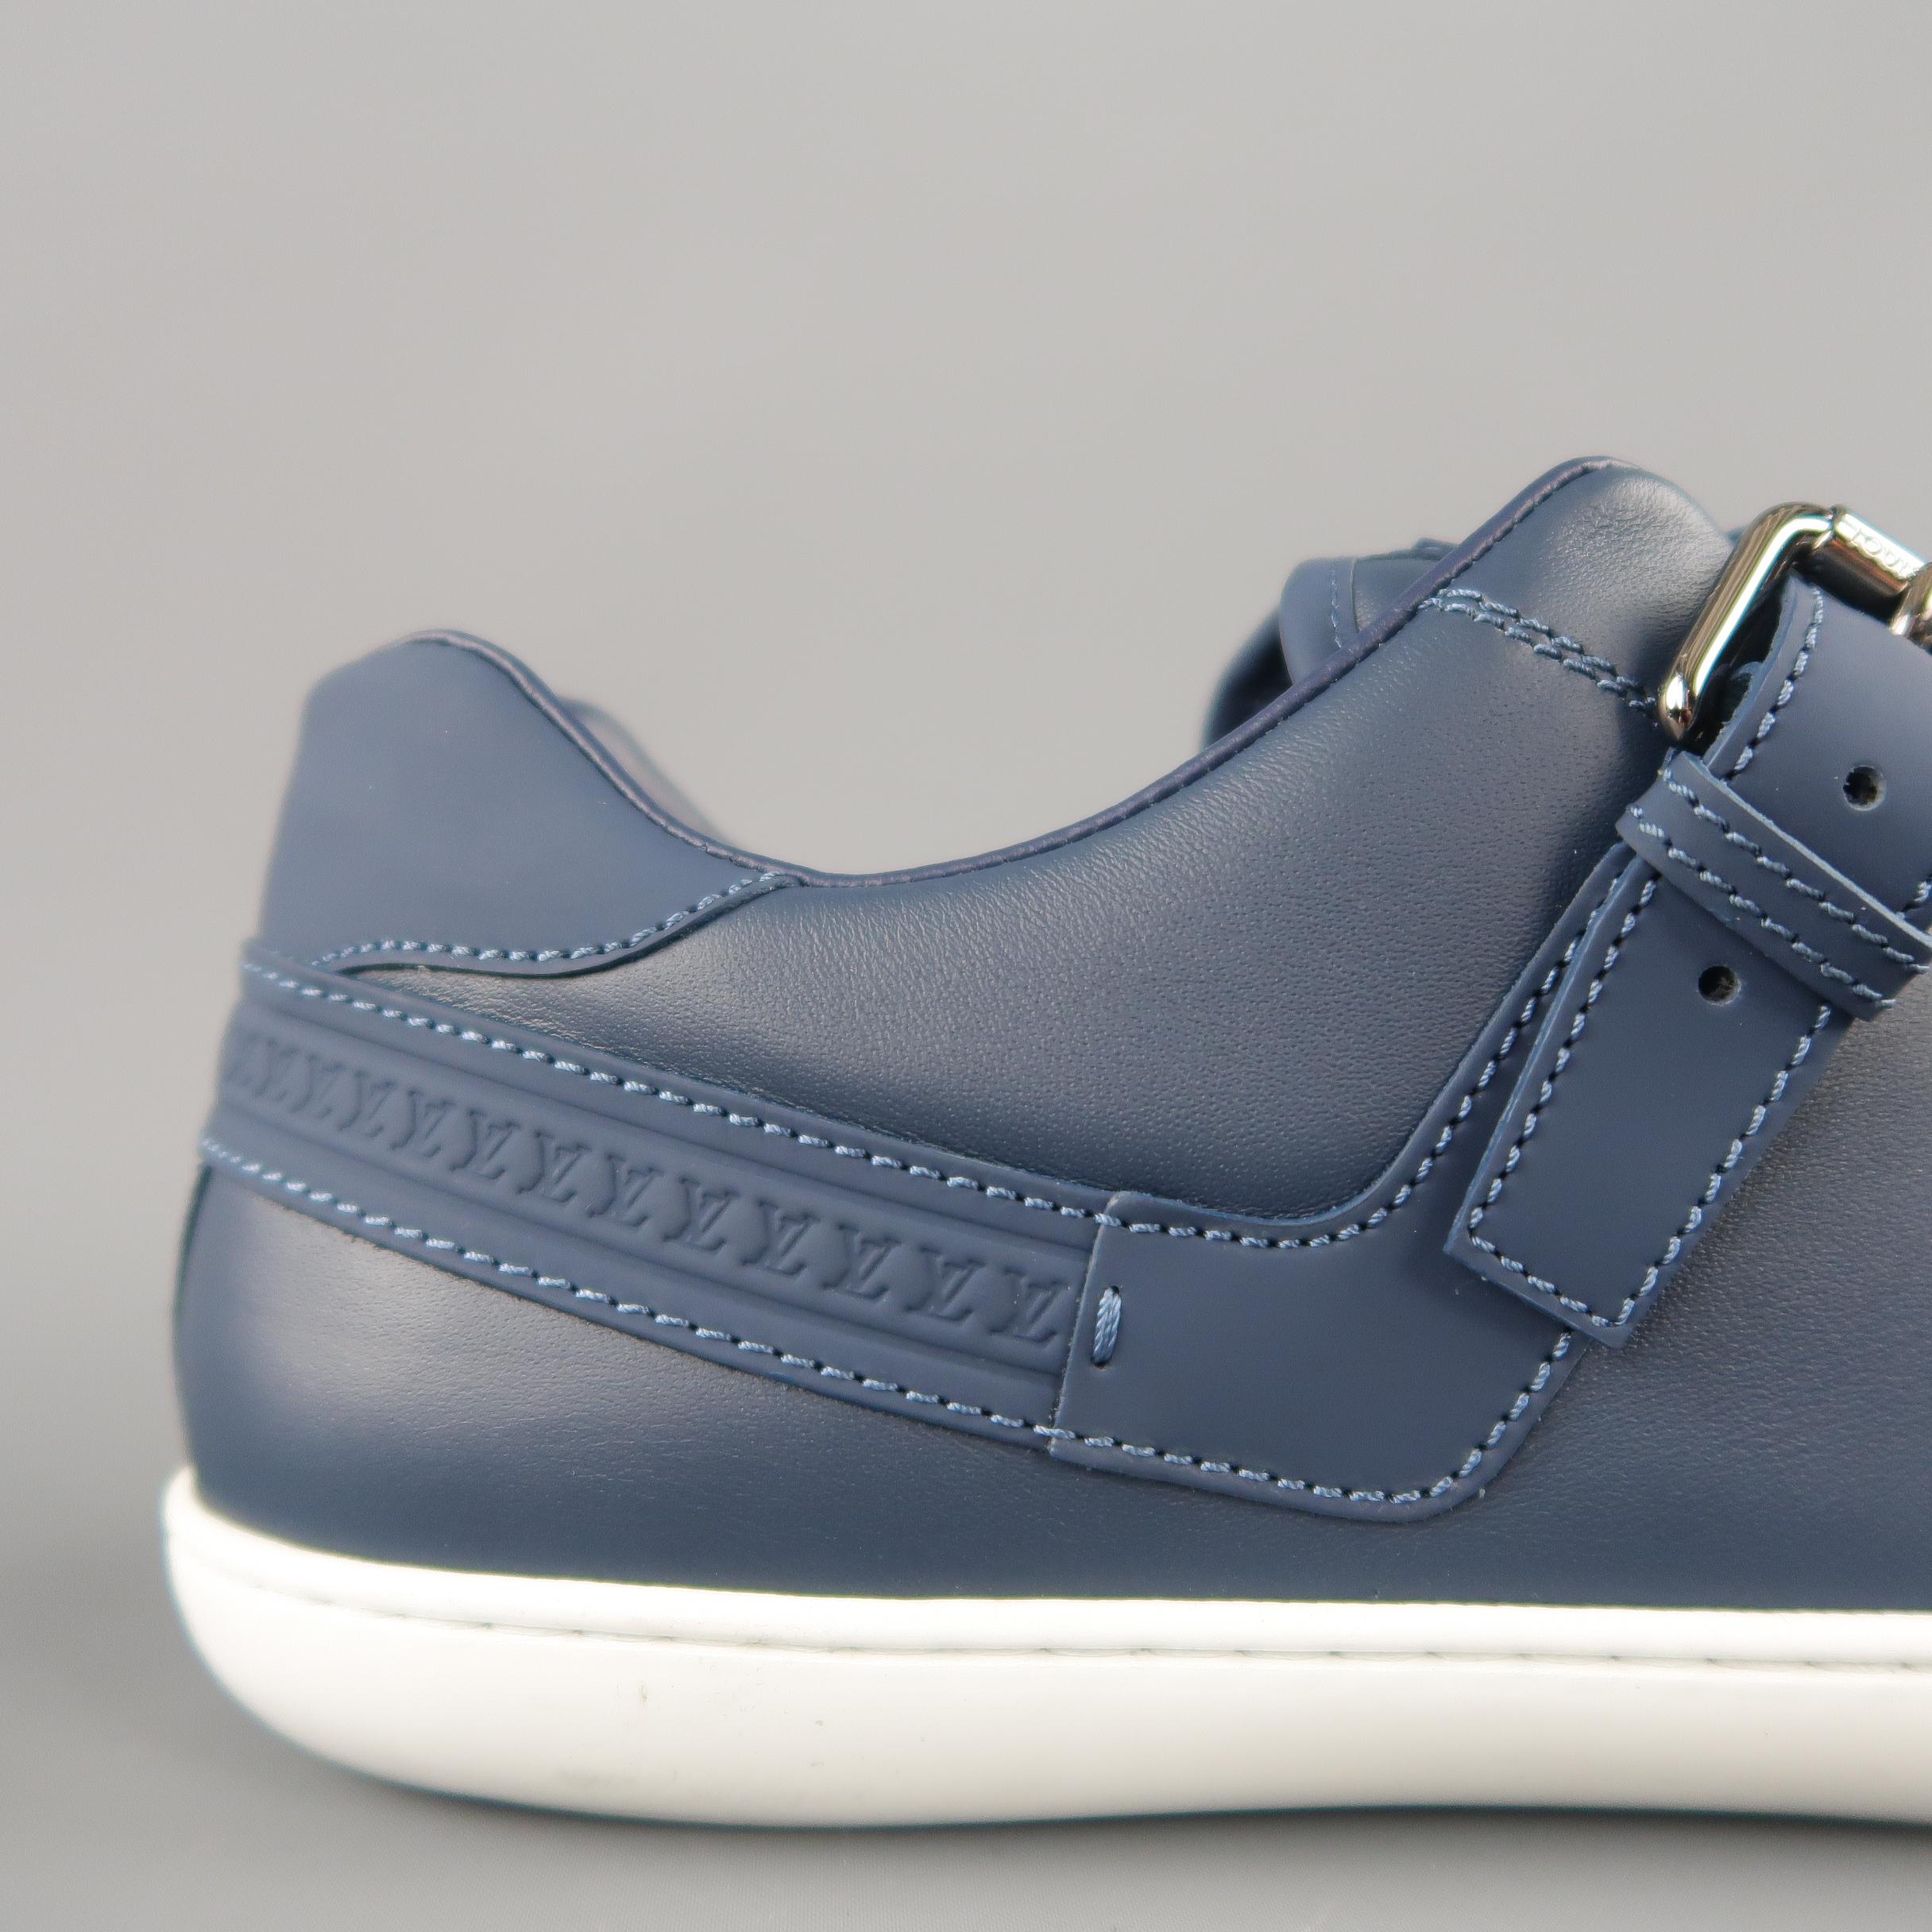 LOUIS VUITTON low top sneakers come in muted navy blue leather with a rubber toe cap, lace up front, white rubber sole, and LV monogram rubber panel and strap with silver tone metal buckle. With box. Made in Italy.
 
Excellent Pre-Owned Condition.
